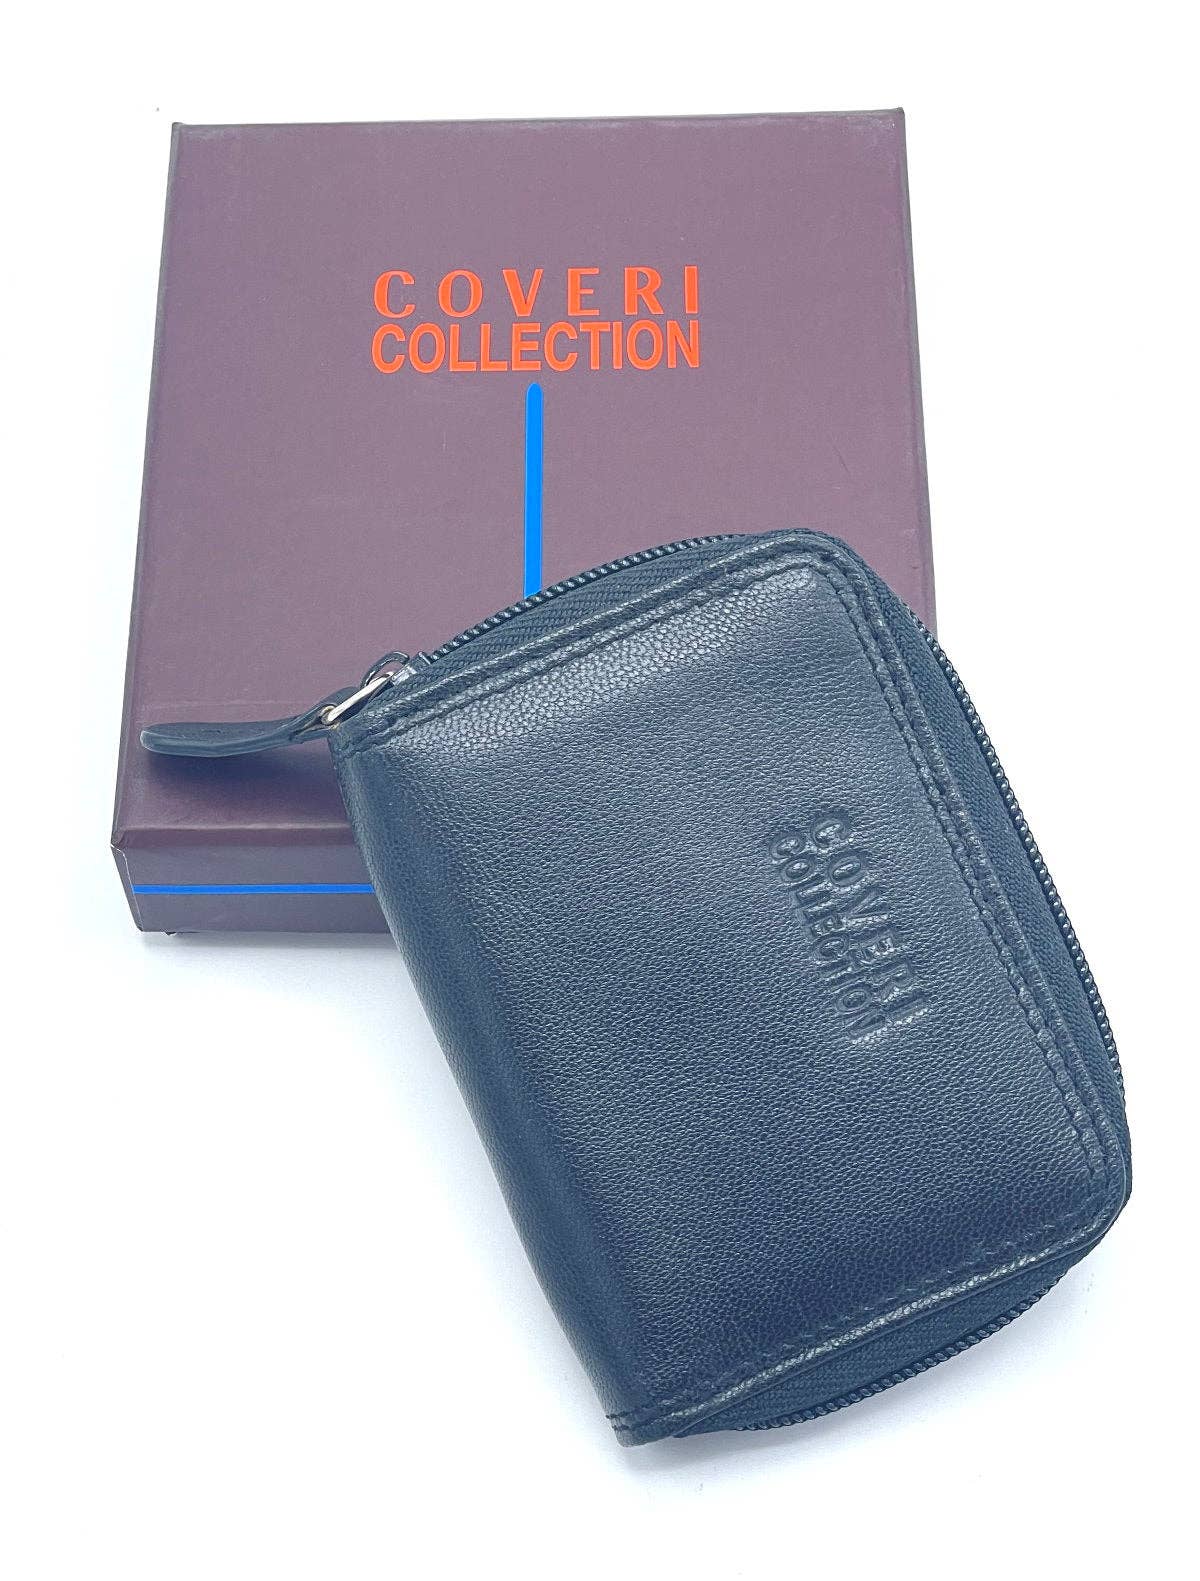 Leather card holder, Coveri Collection, art. 10711229.336